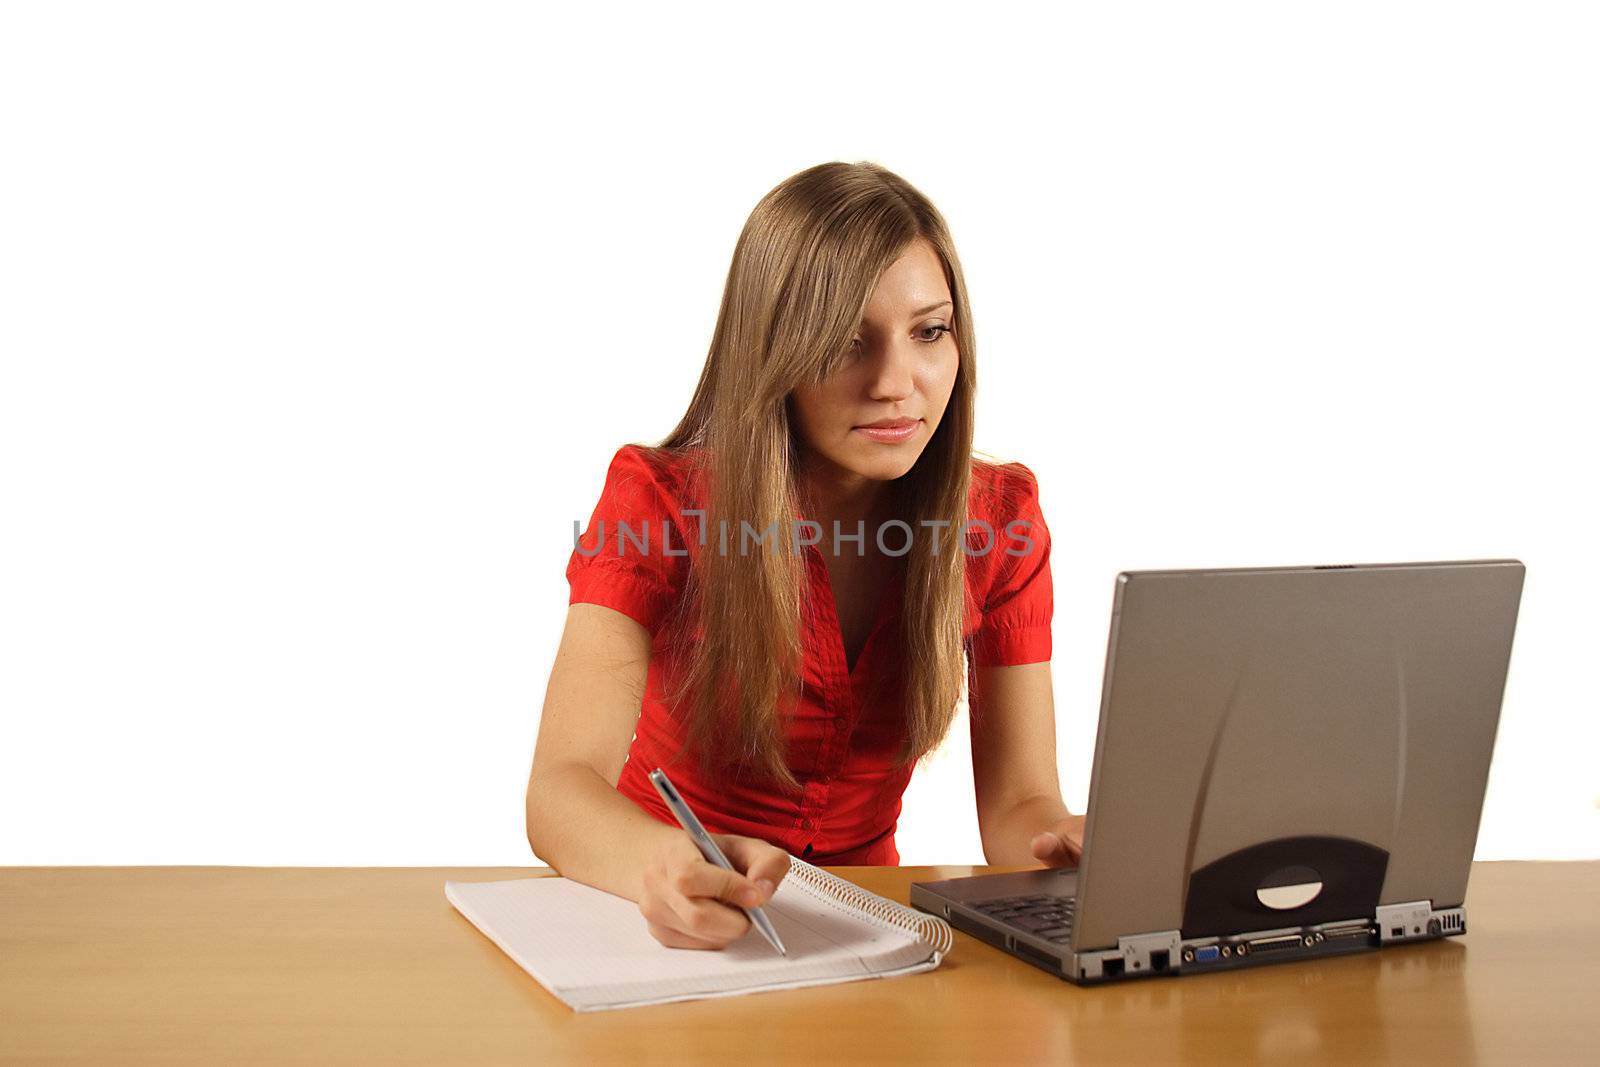 A young handsome woman working concentrated. All isolated on white background.